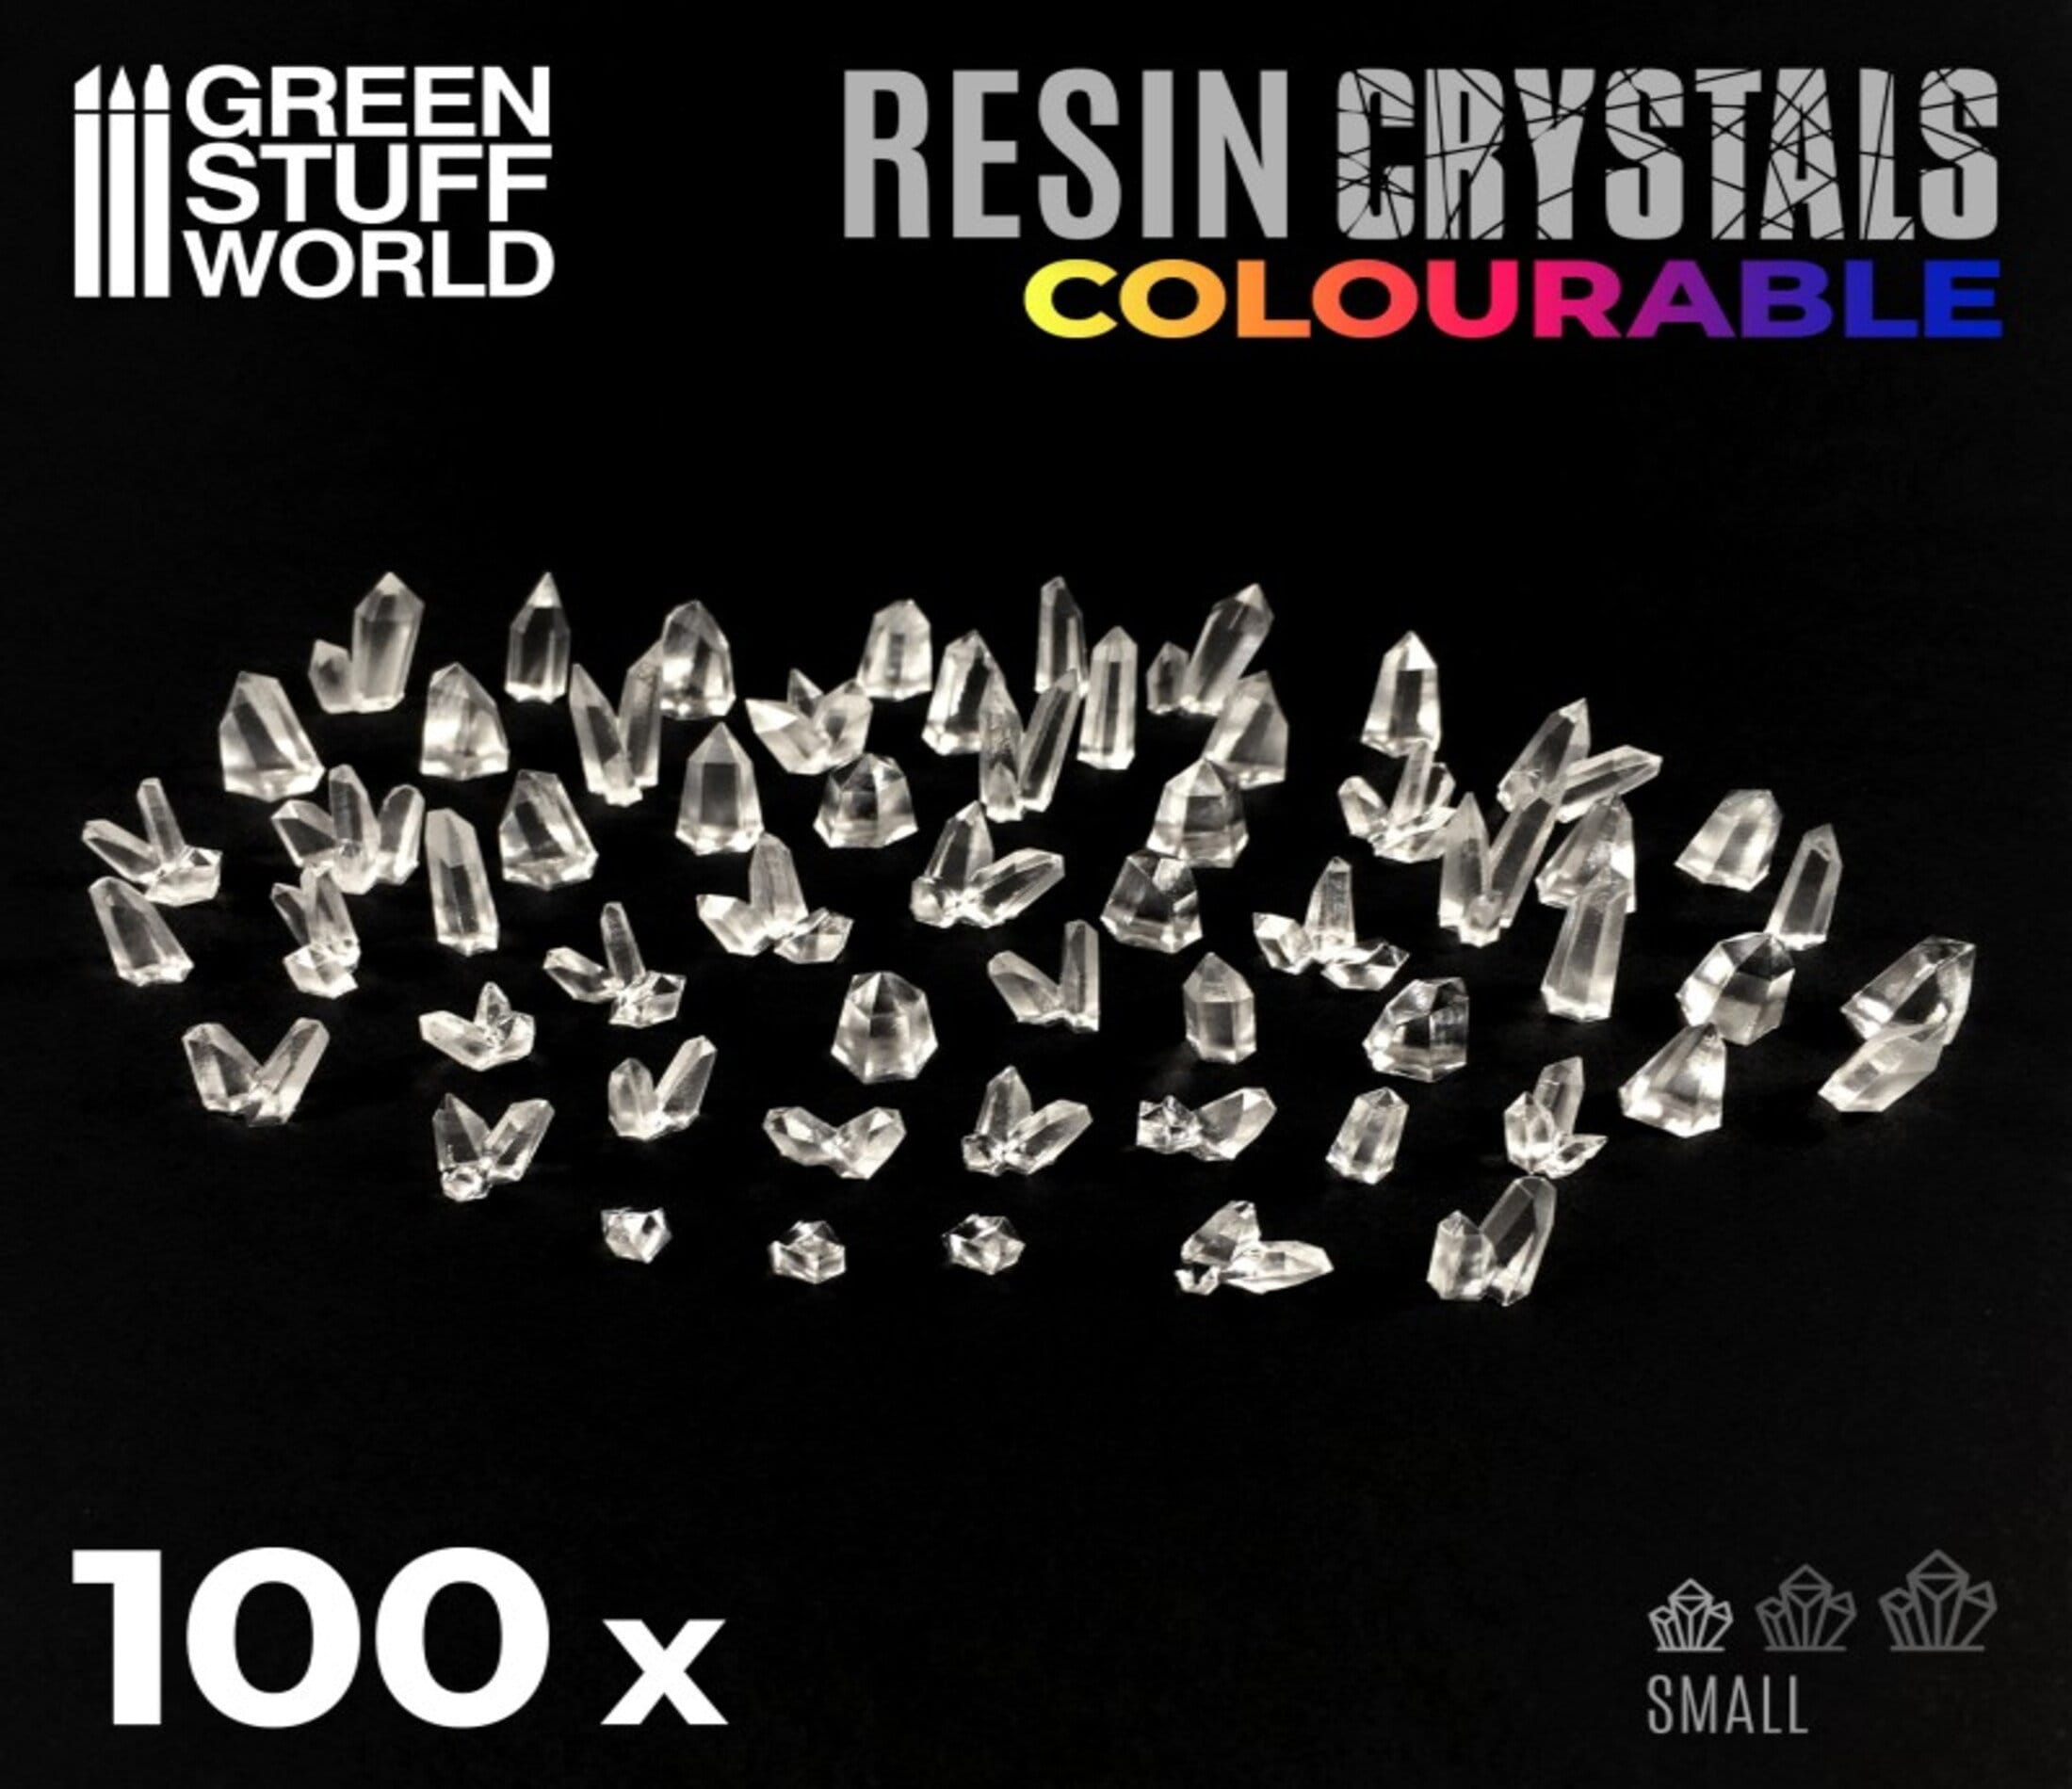 ▷ CLEAR Resin Crystals - Small